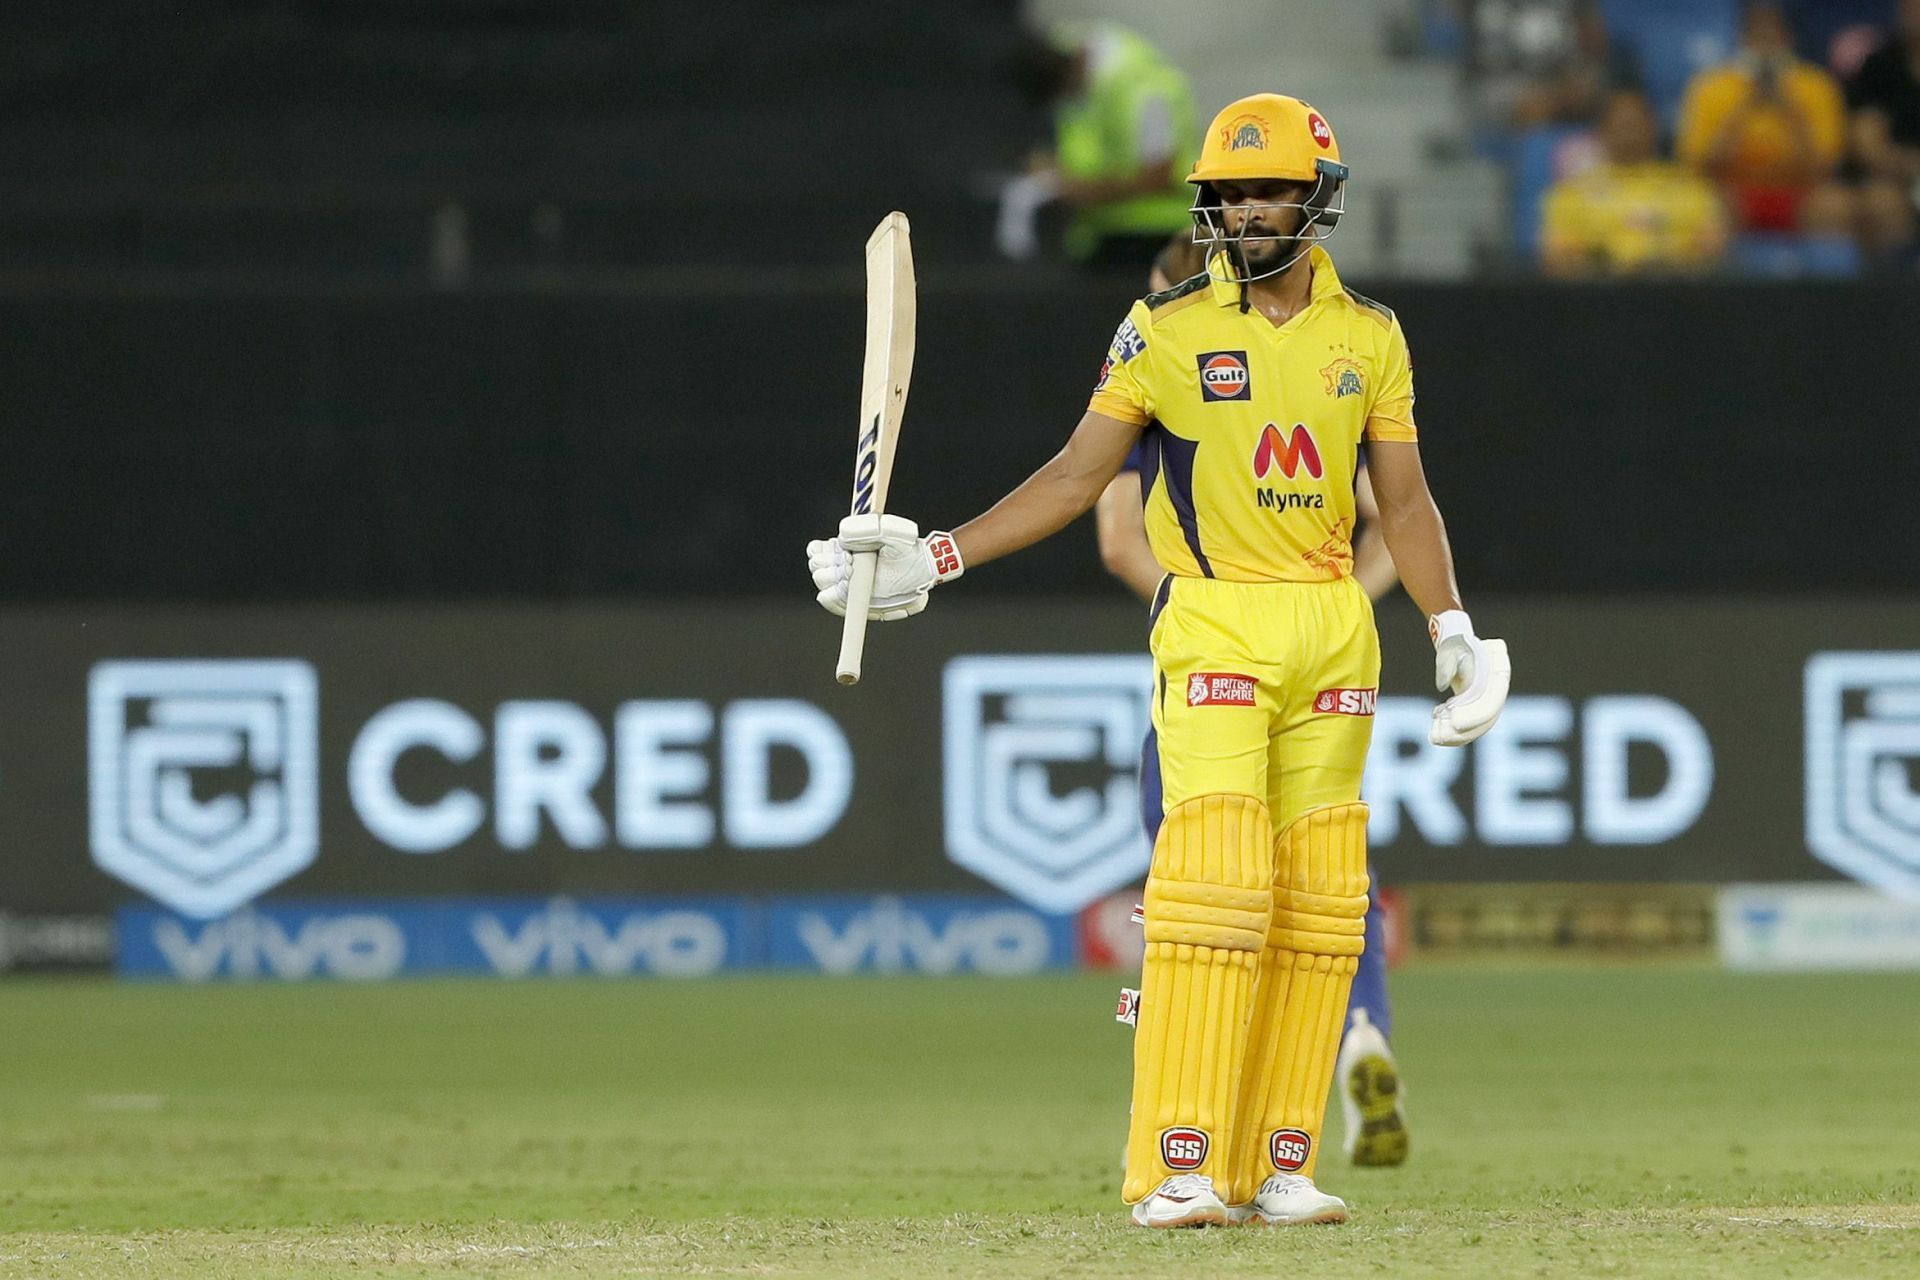 Gaikwad has been in sensational form recently (Pic Credits: IPL)